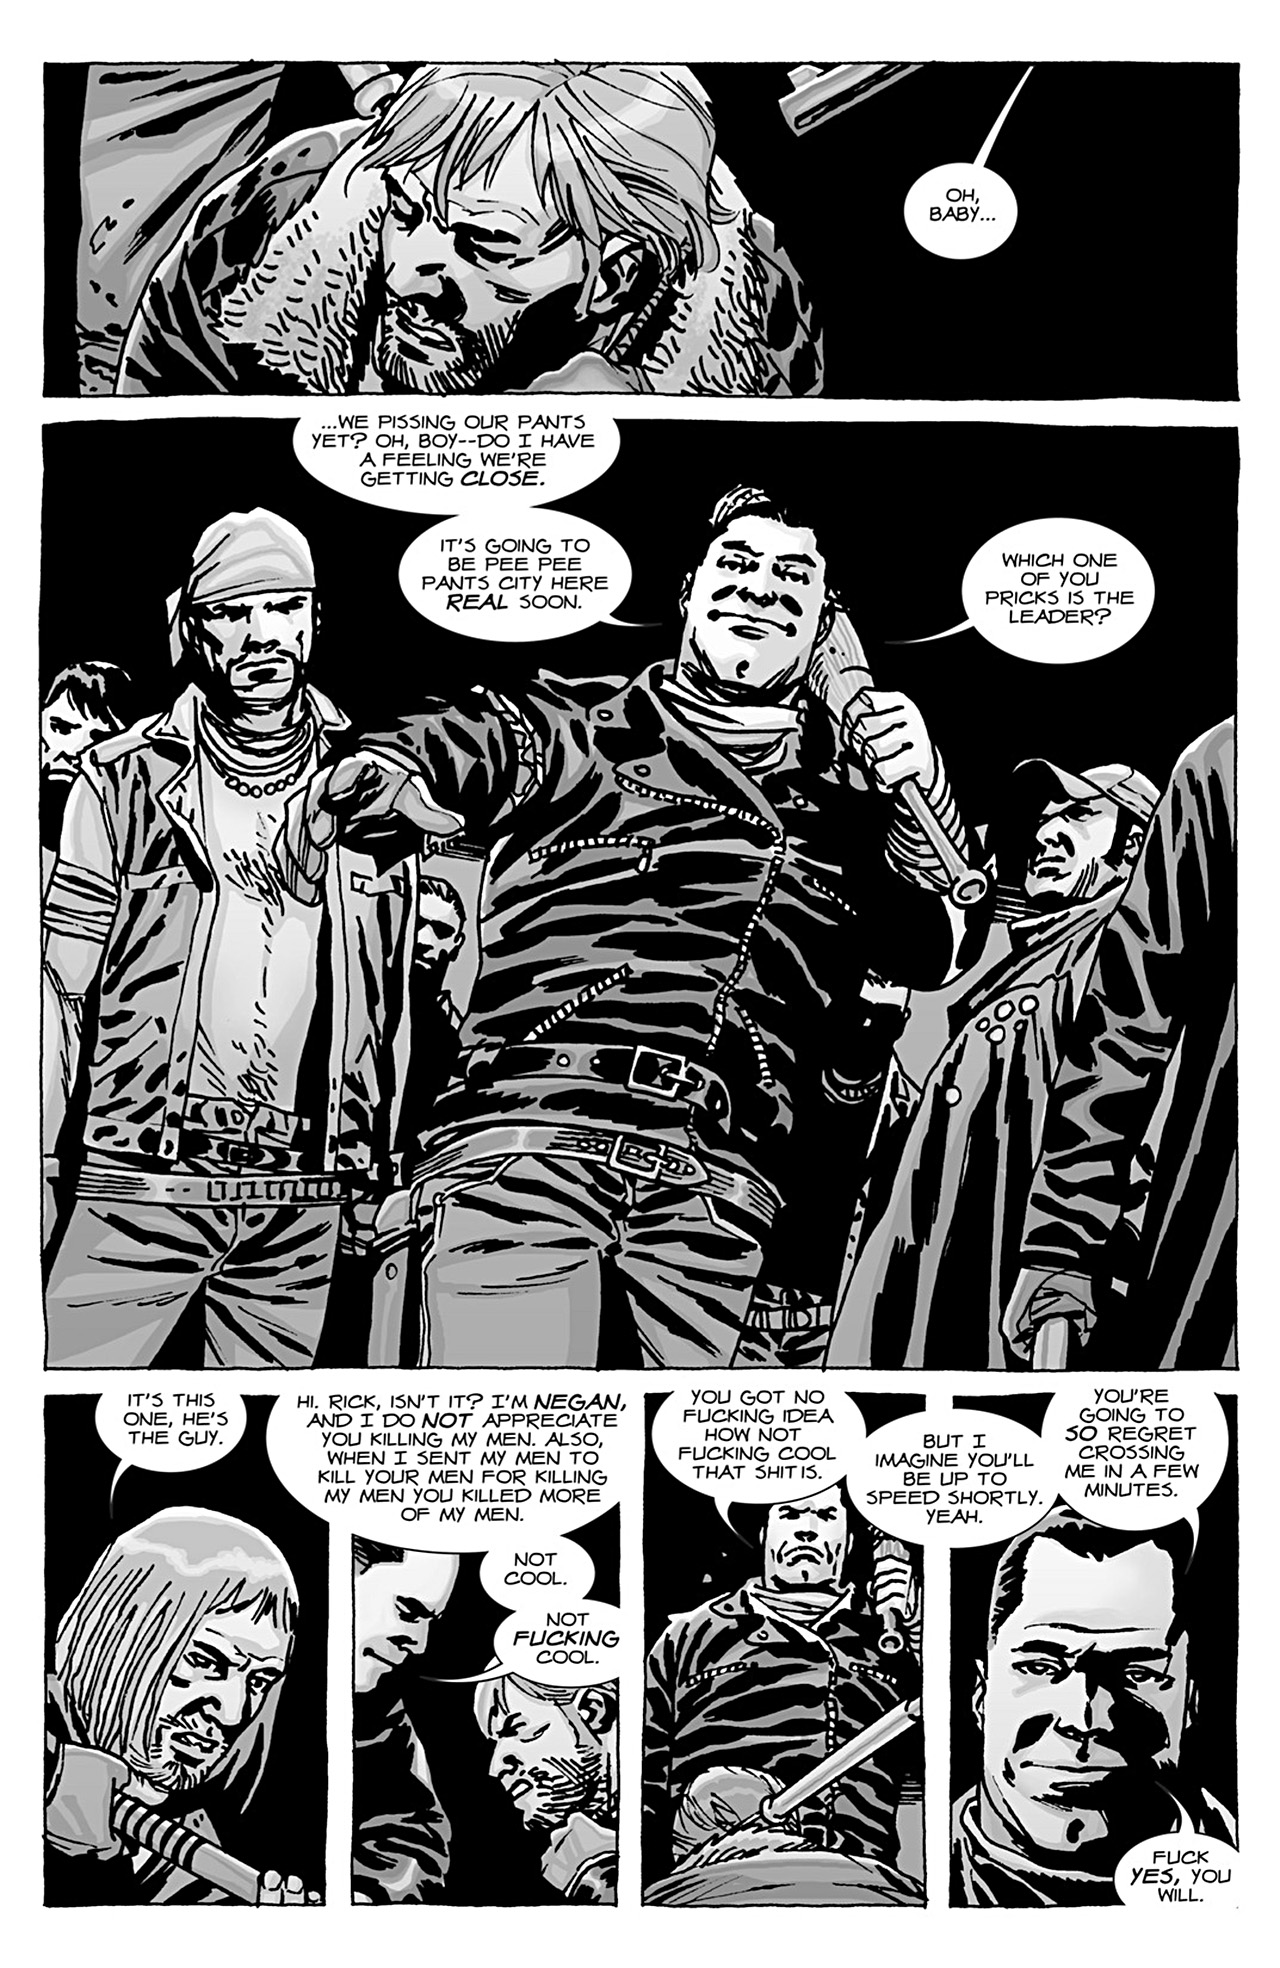 THE WALKING DEAD 100 - SOMETHING TO FEAR, Part Four